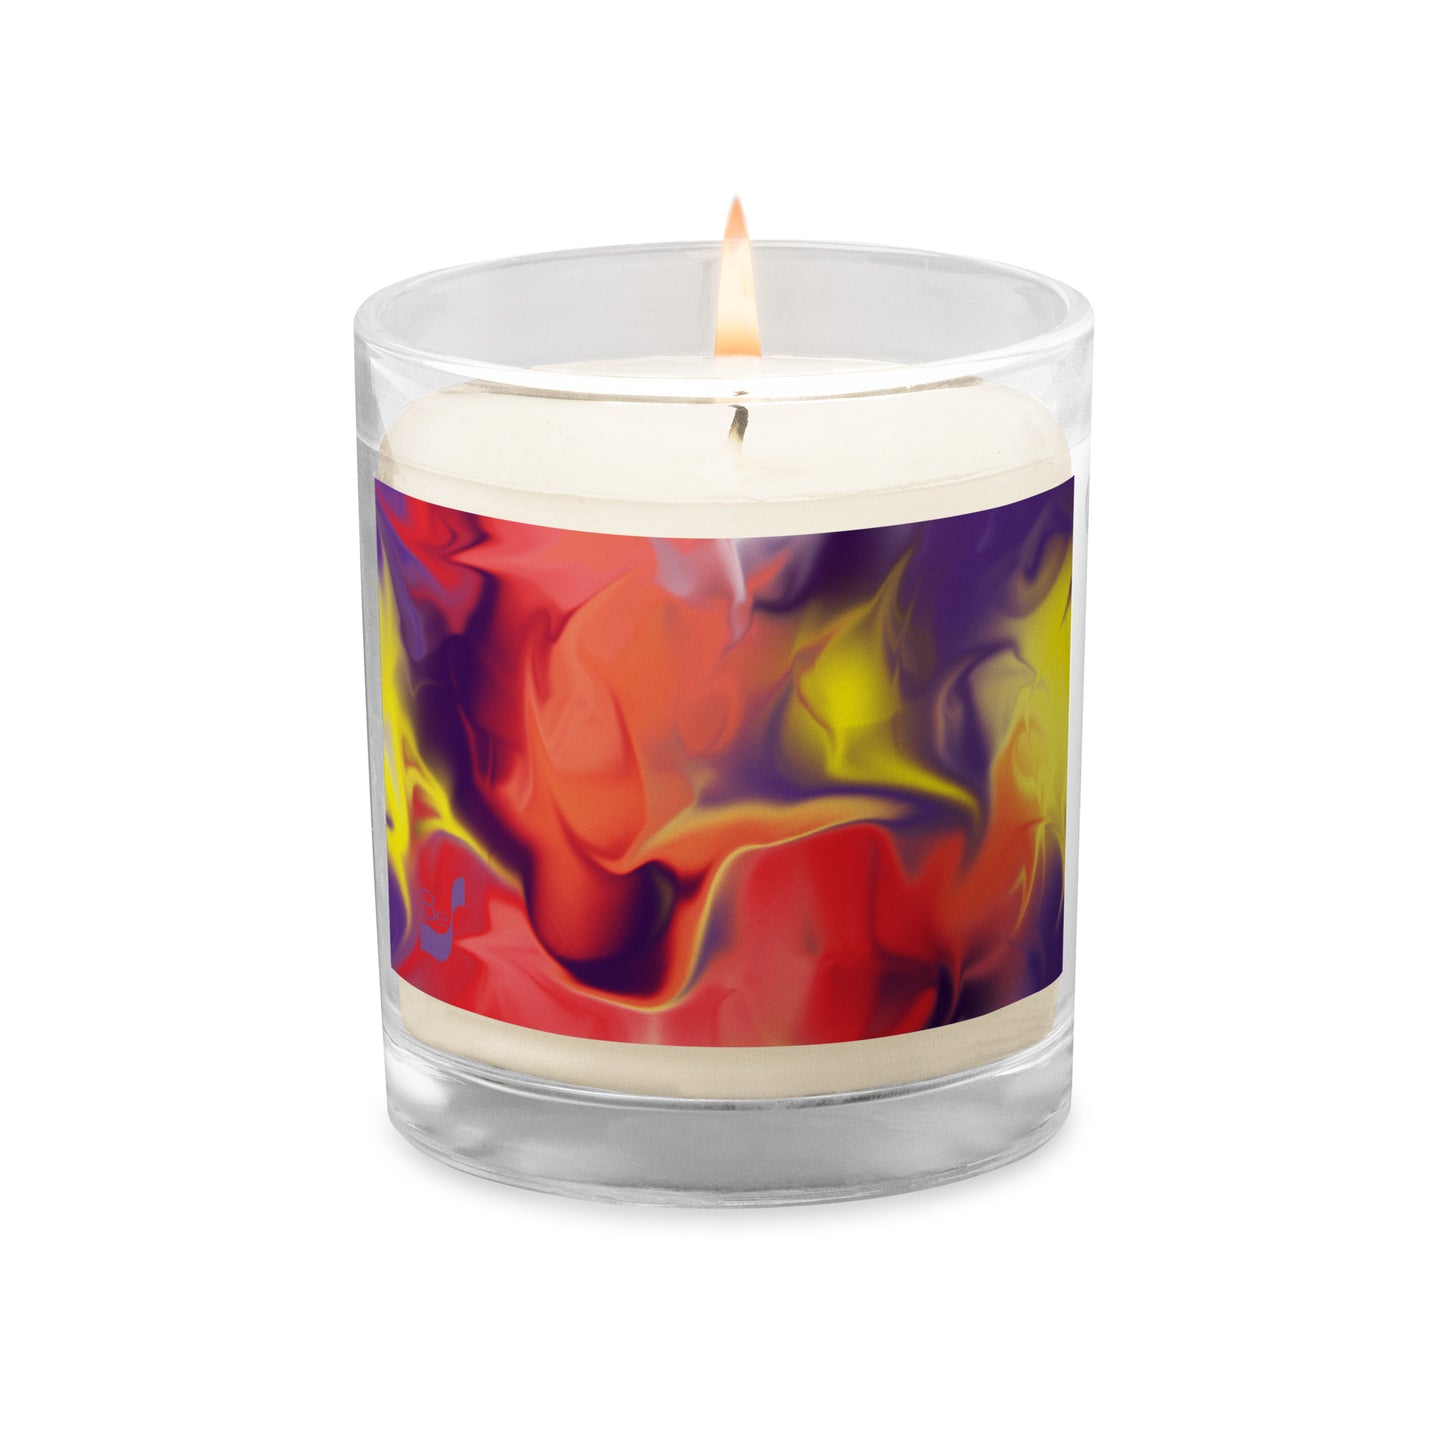 Airless BeSculpt Abstract Art Glass Jar Soy Wax Candle Reversed Image